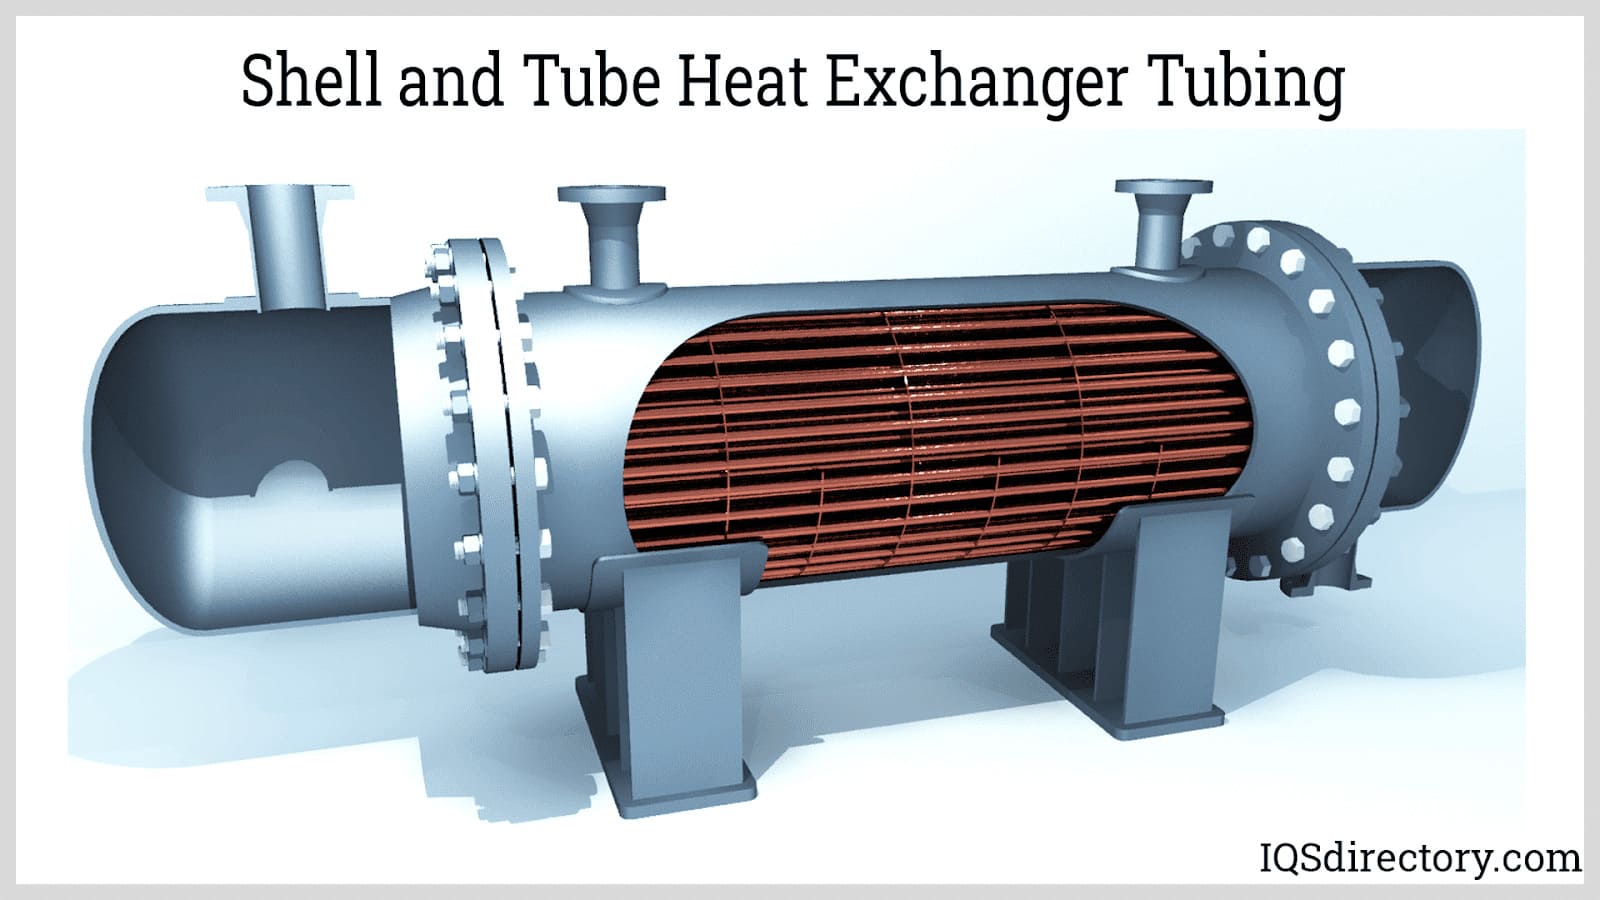 Shell and Tube Heat Exchanger Tubing